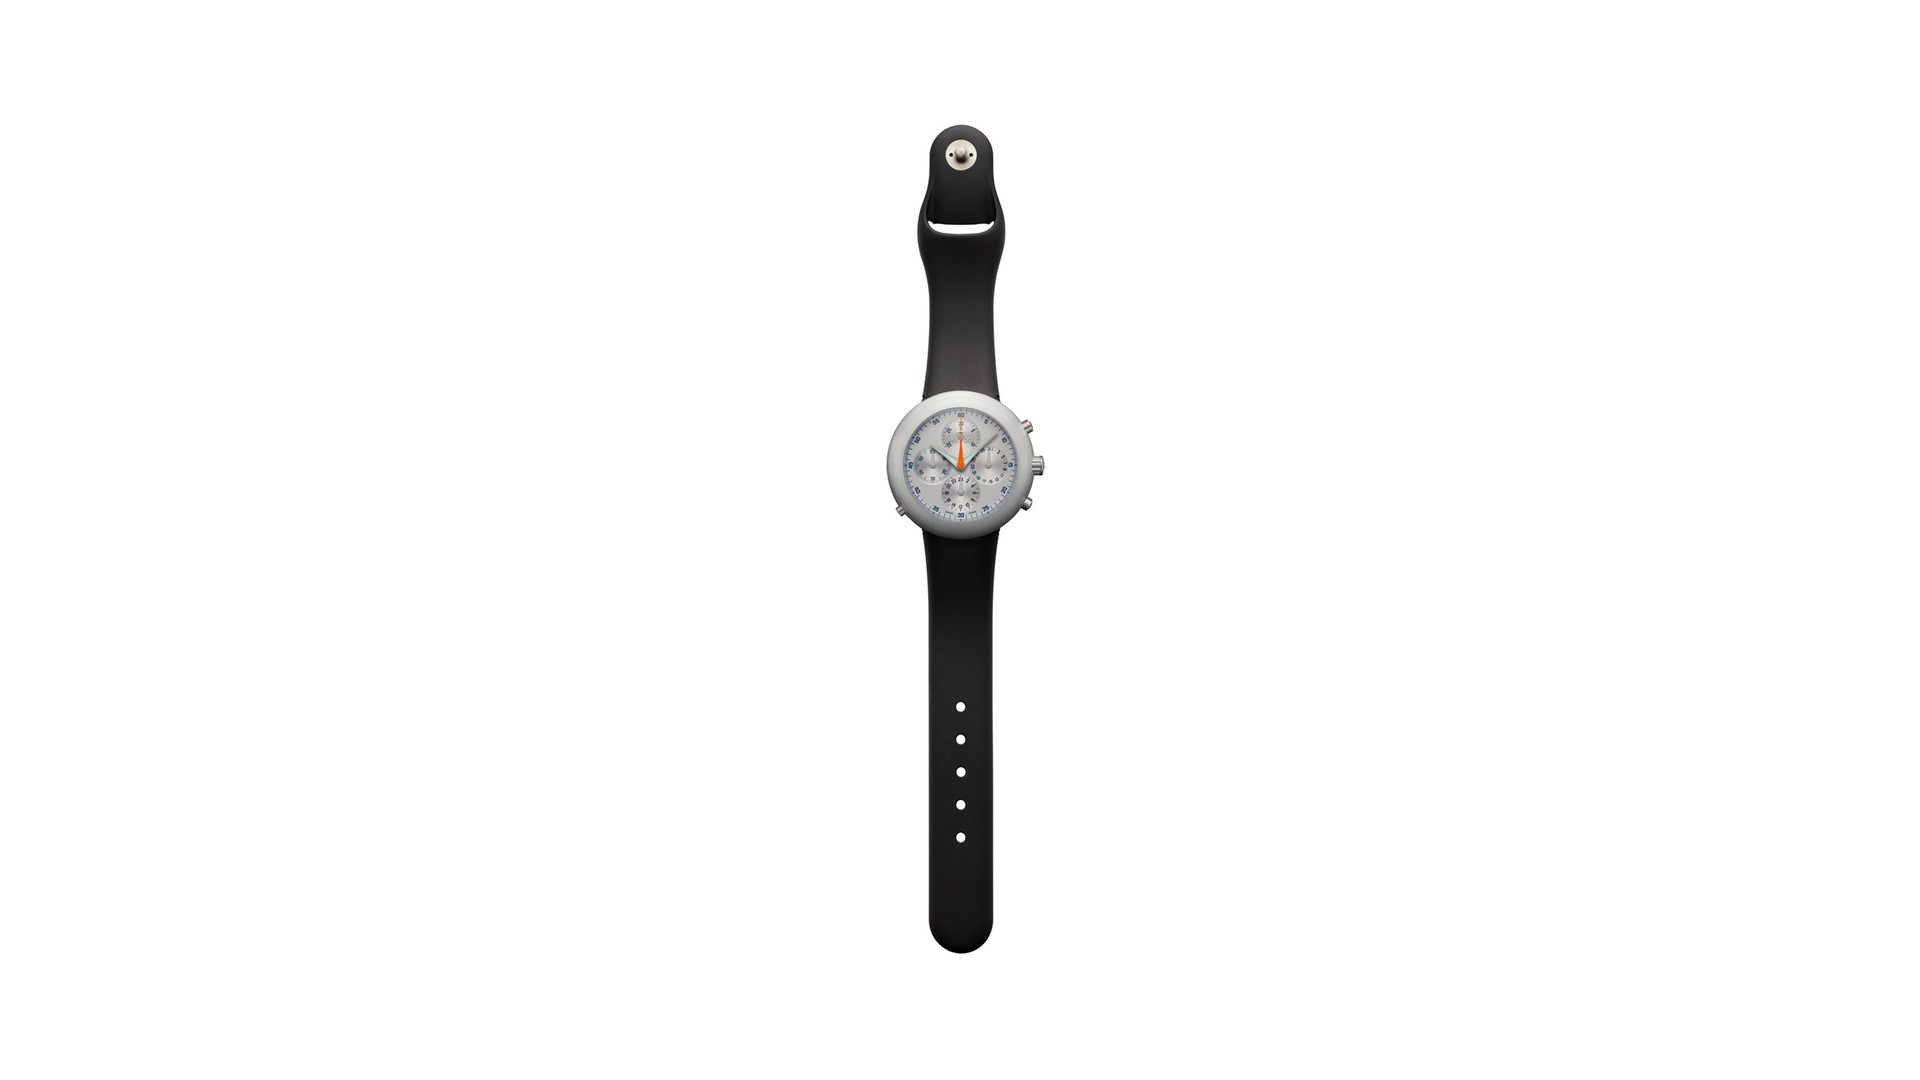 Marc Newson, Ikepod 'Hemipode' Chronograph wristwatch (1998), Available  for Sale